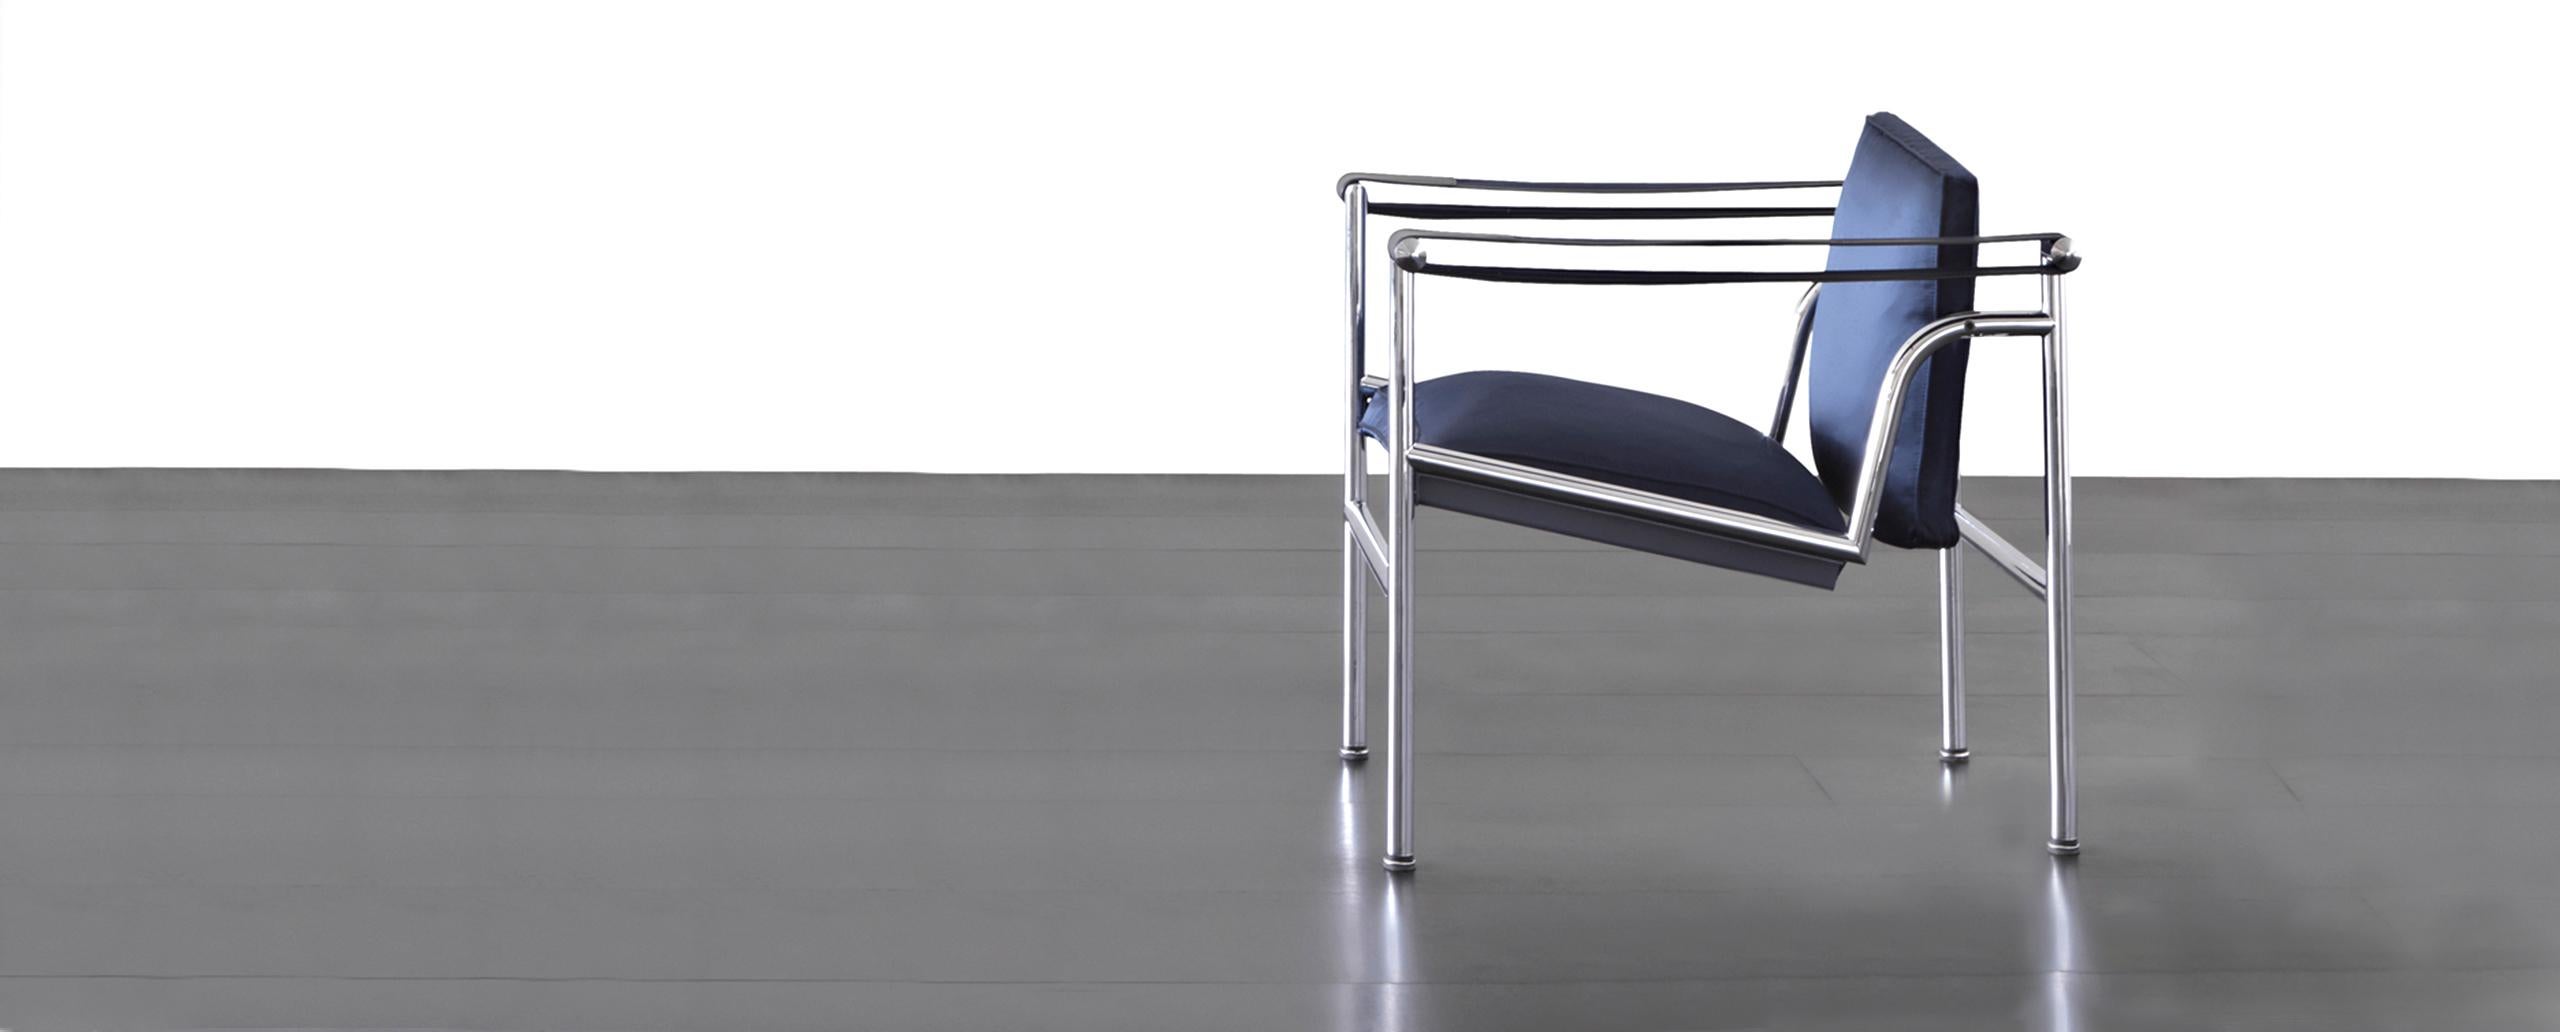 Chair designed by Le Corbusier, Pierre Jeanneret, Charlotte Perriand in 1928. Relaunched in 2012.
Manufactured by Cassina in Italy.

Armchair with structure in polished trivalent chrome plated (CR3) steel. Padded seat and backrest in polyurethane.